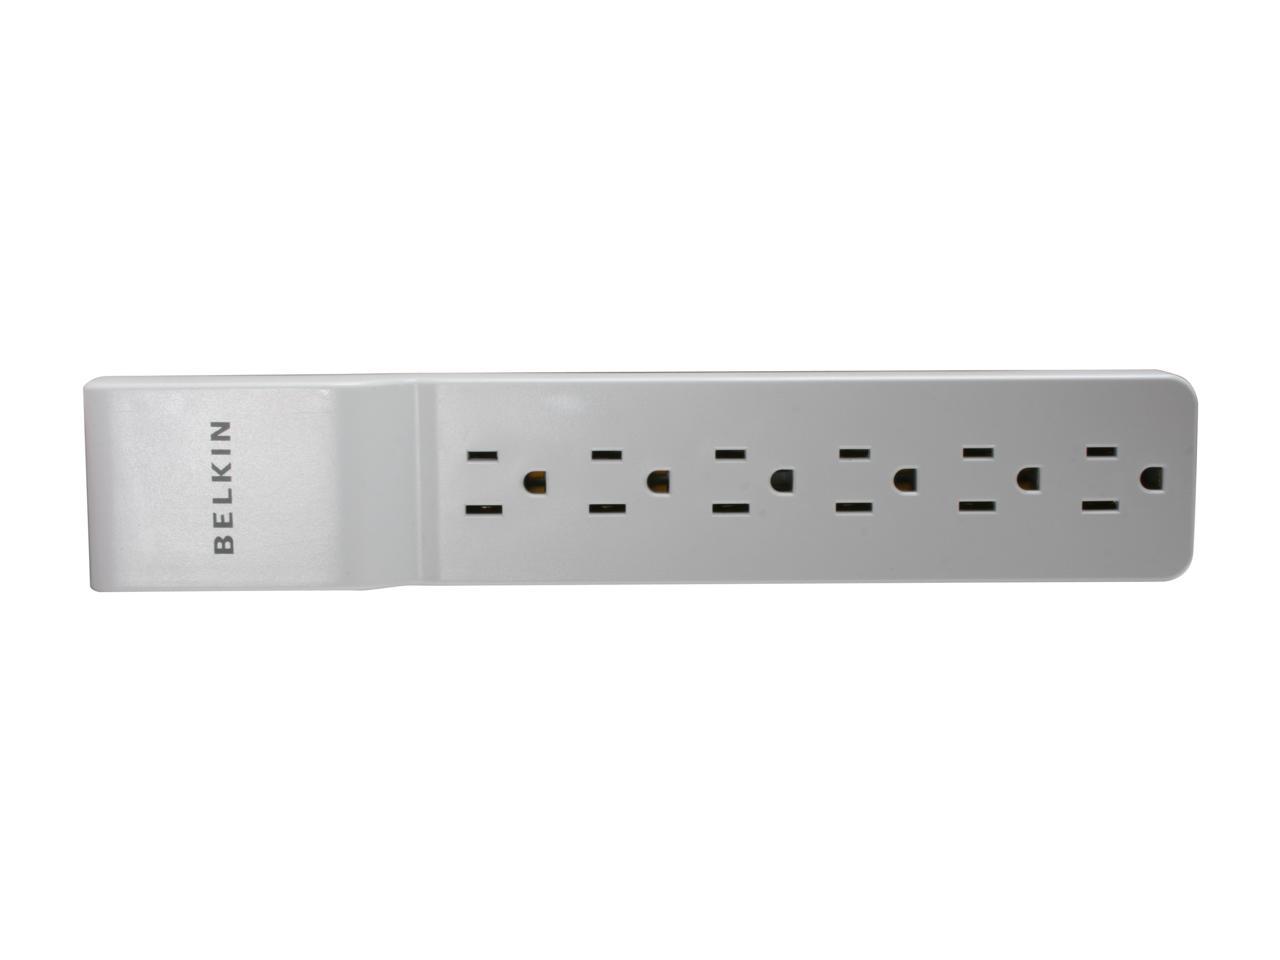 BELKIN BE106000-08R 8 Feet 6 Outlets 720 Joules Home / Office Surge Protector